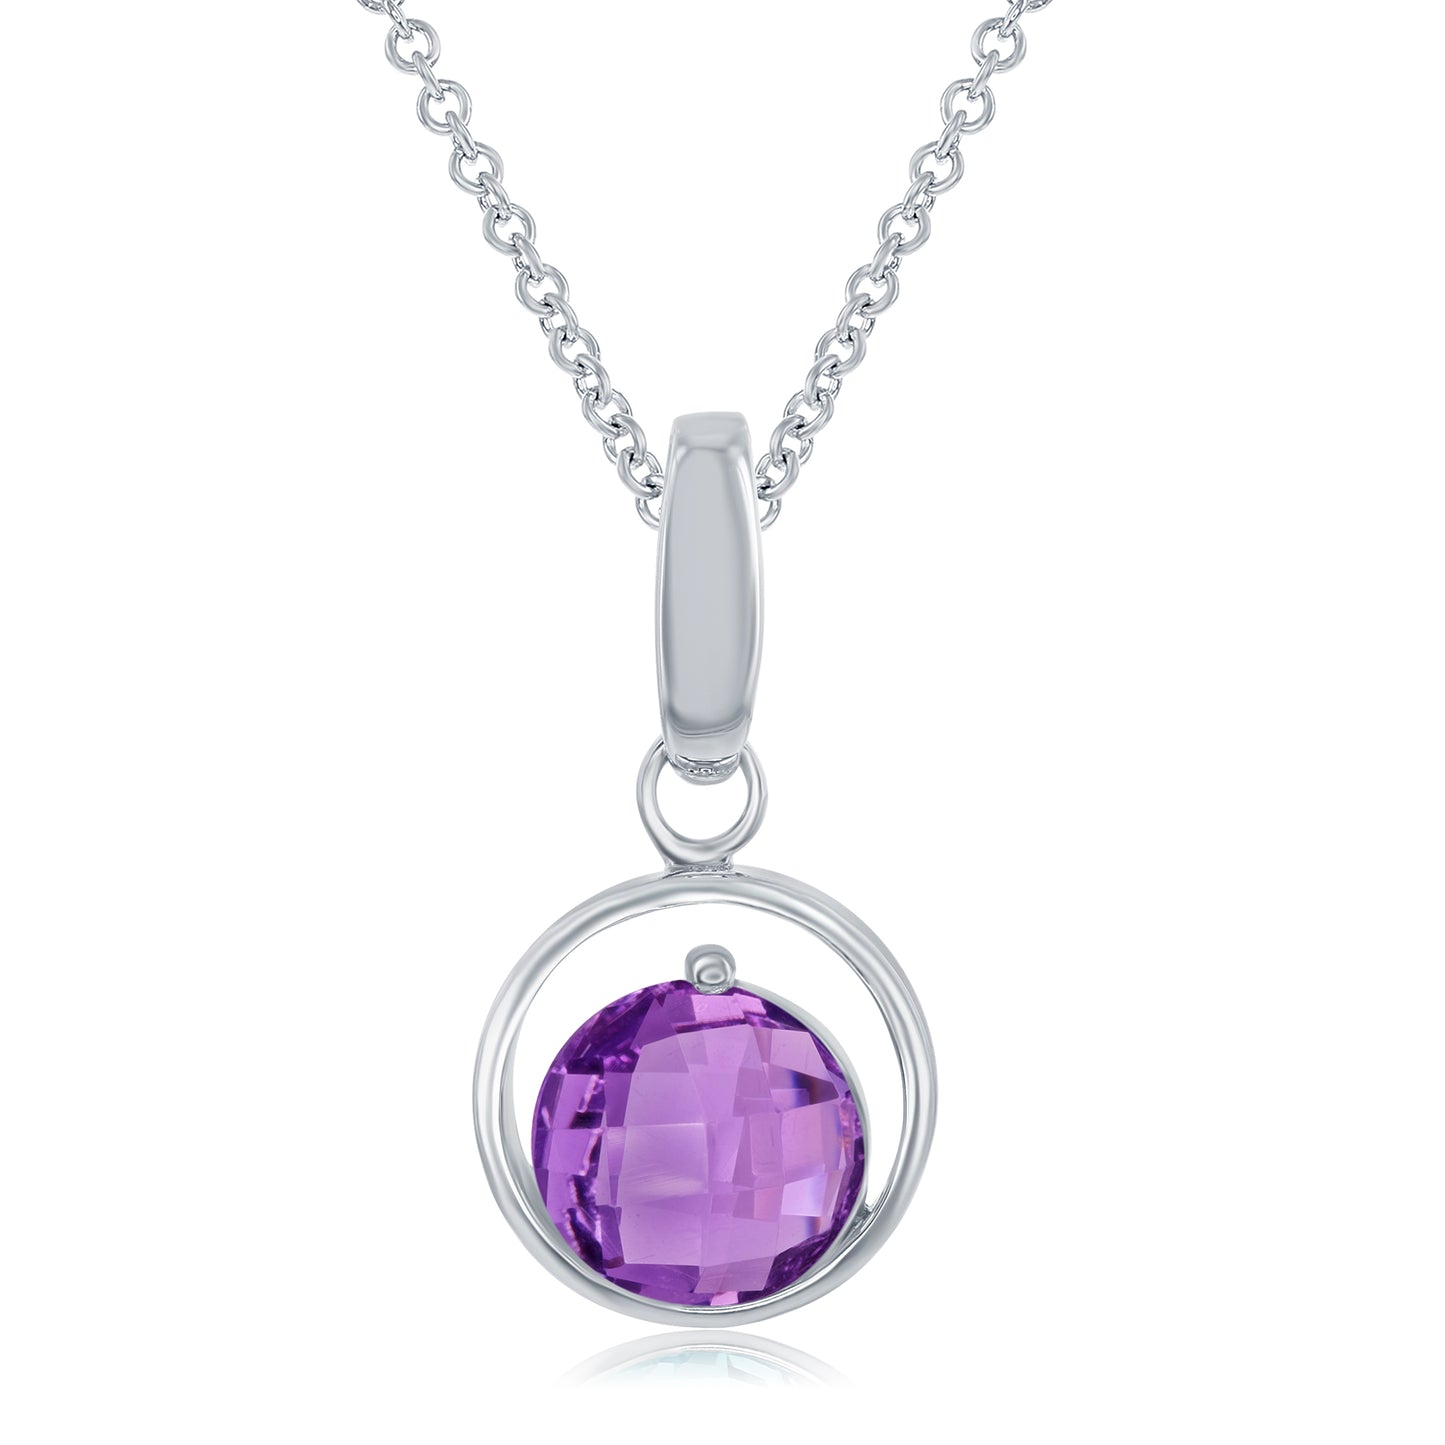 AMETHYST CRICLE STERLING SILVER PENDANT - Reigning Jewels Fine Jewelry 